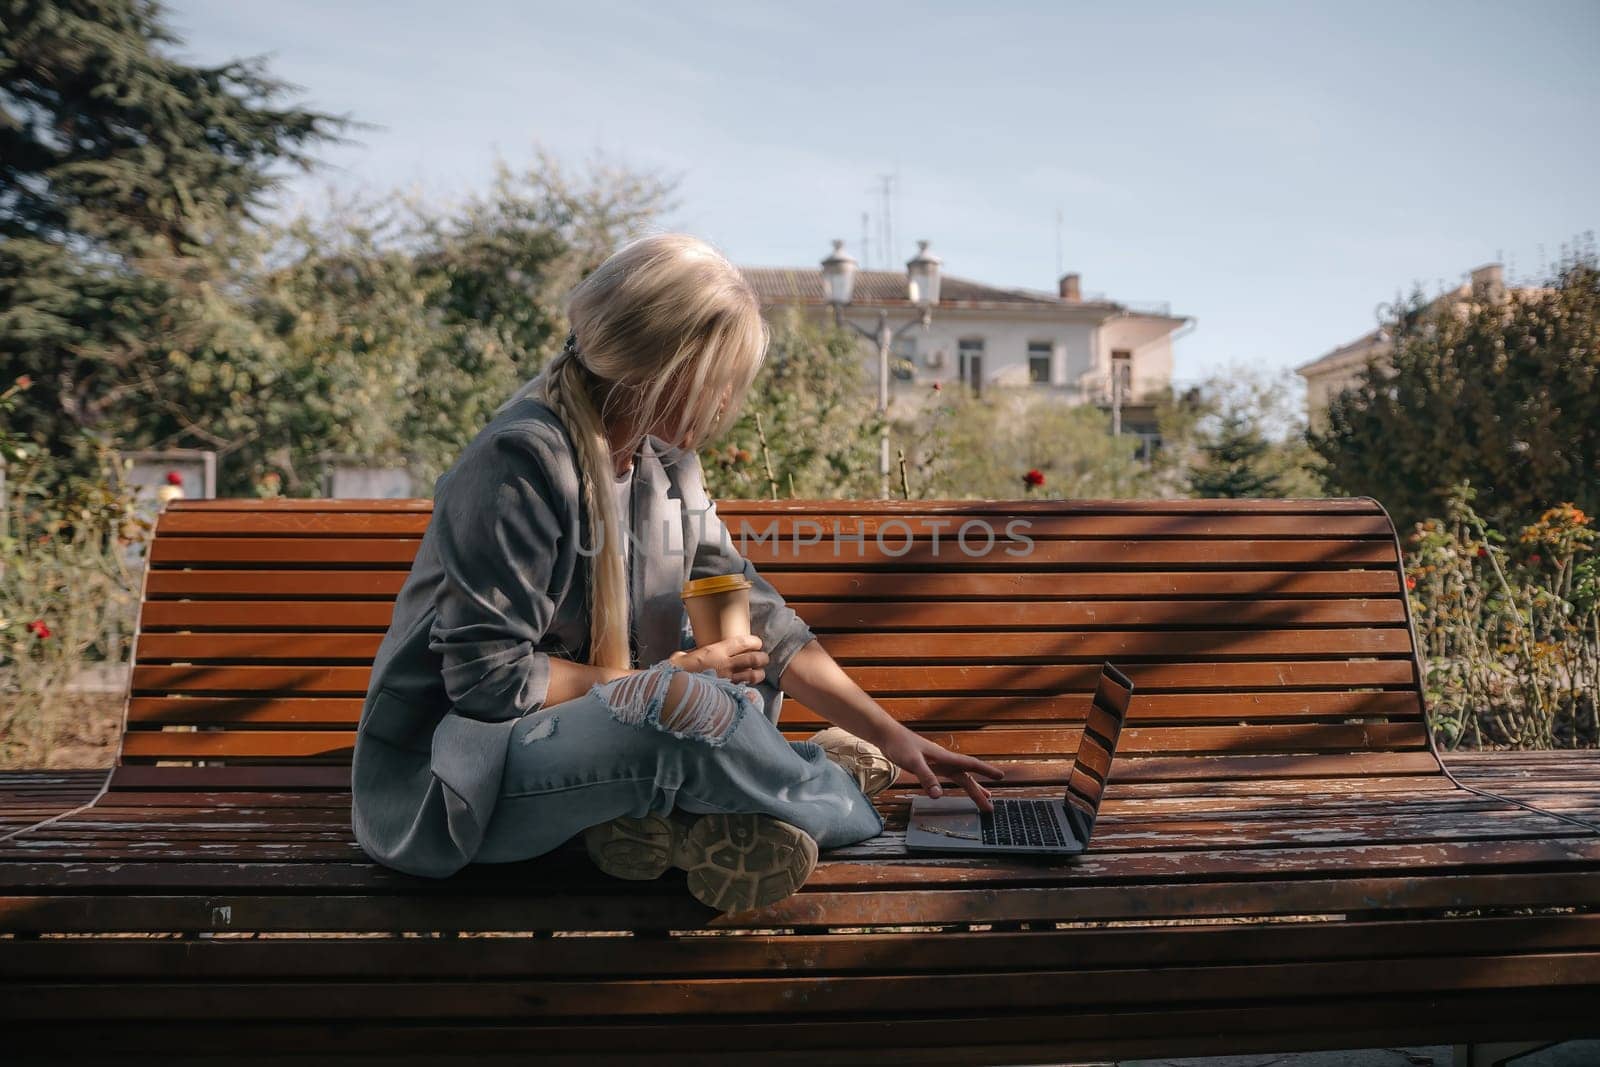 A woman sits on a bench with a laptop open in front of her. She has a cup of coffee in her hand and her jeans are ripped. The scene suggests a relaxed and casual atmosphere. by Matiunina